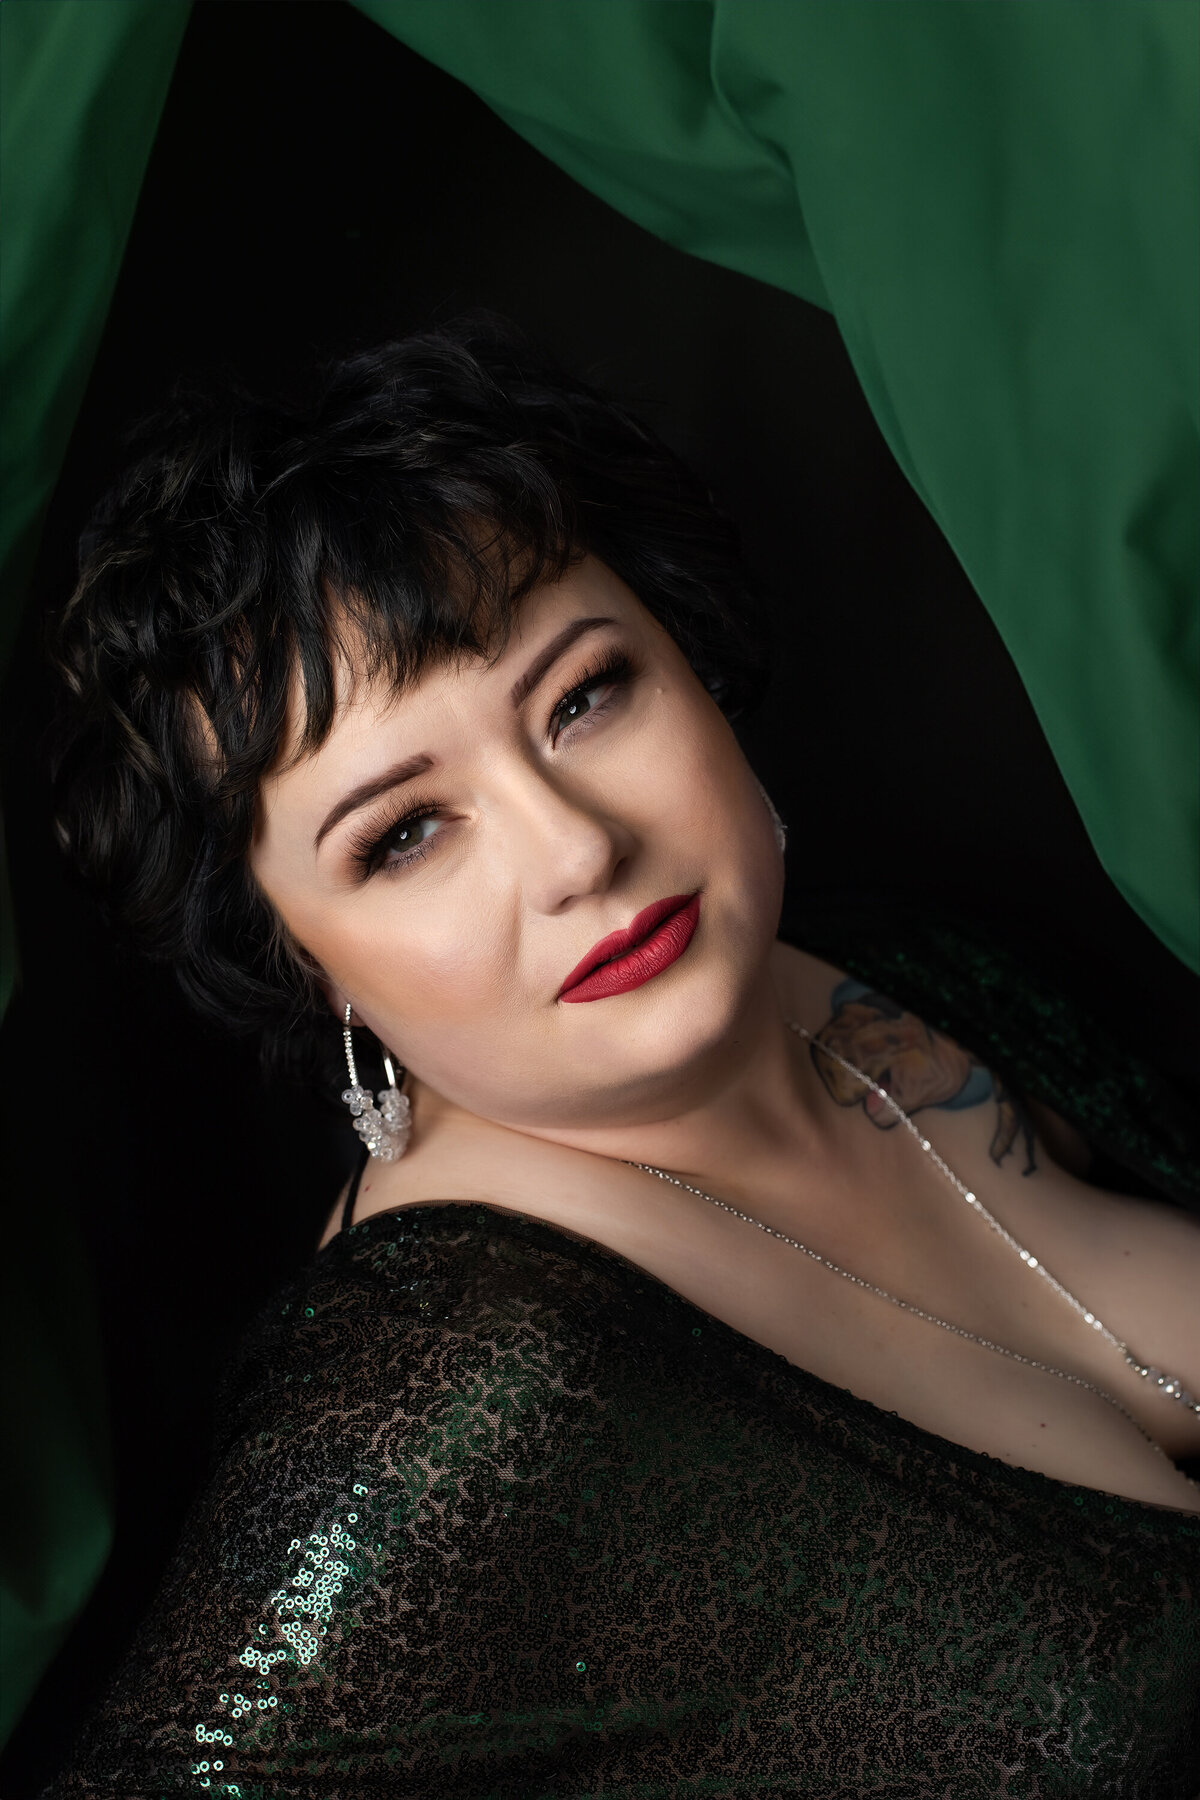 Glamorous portrait on a woman in a green sequin dress with green fabric flowing around her